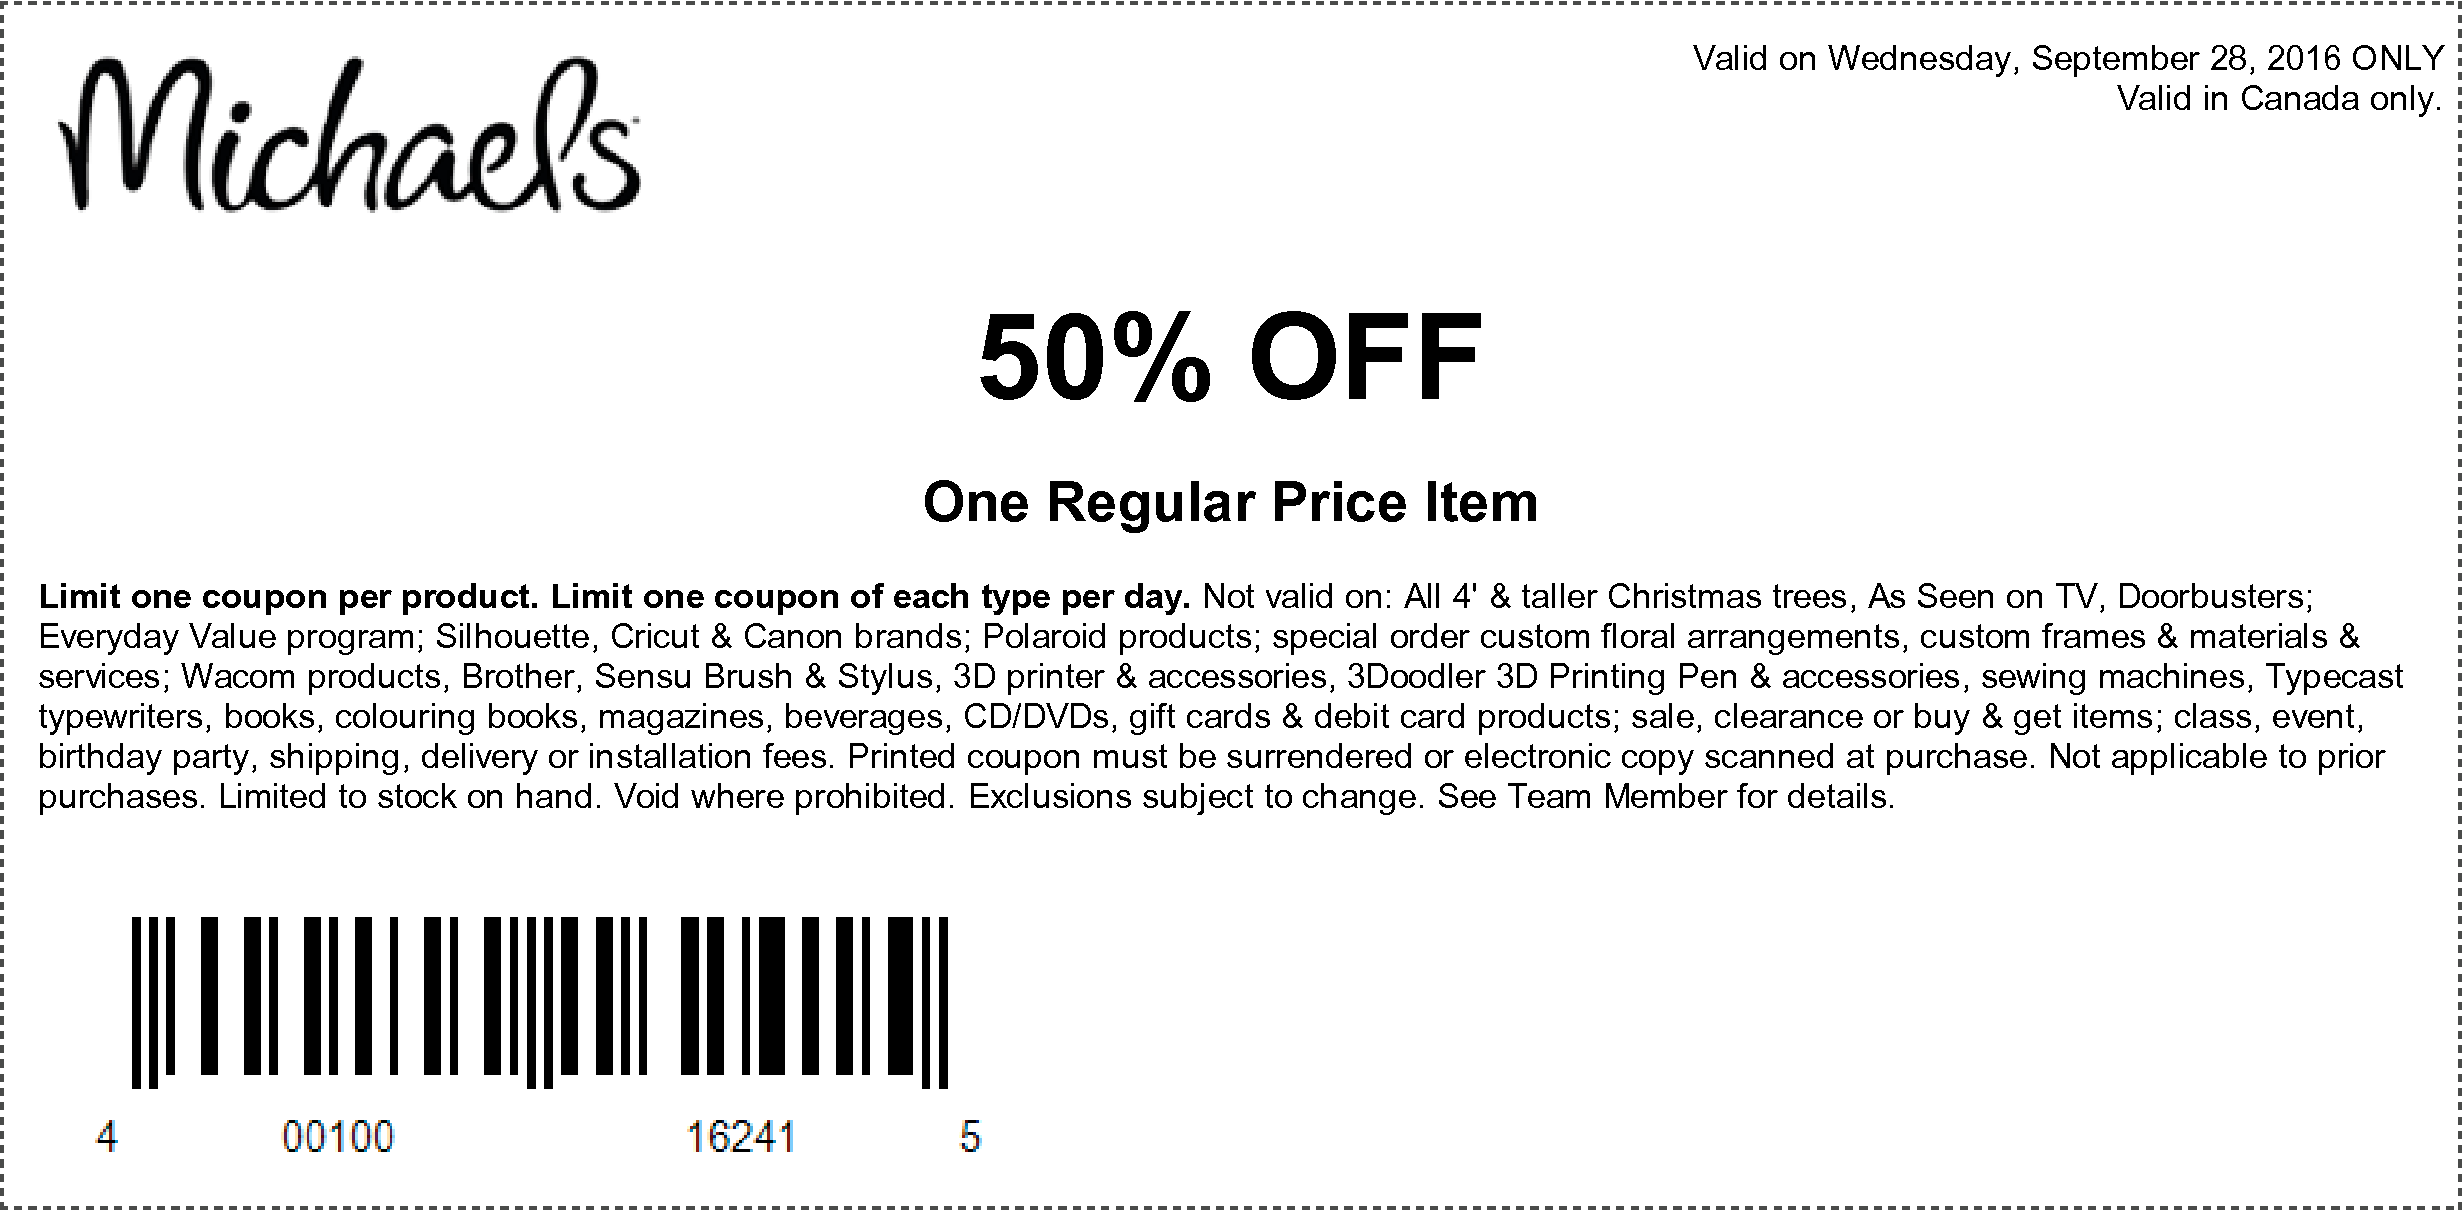 michaels-coupon-take-50-off-one-regular-price-item-today-only